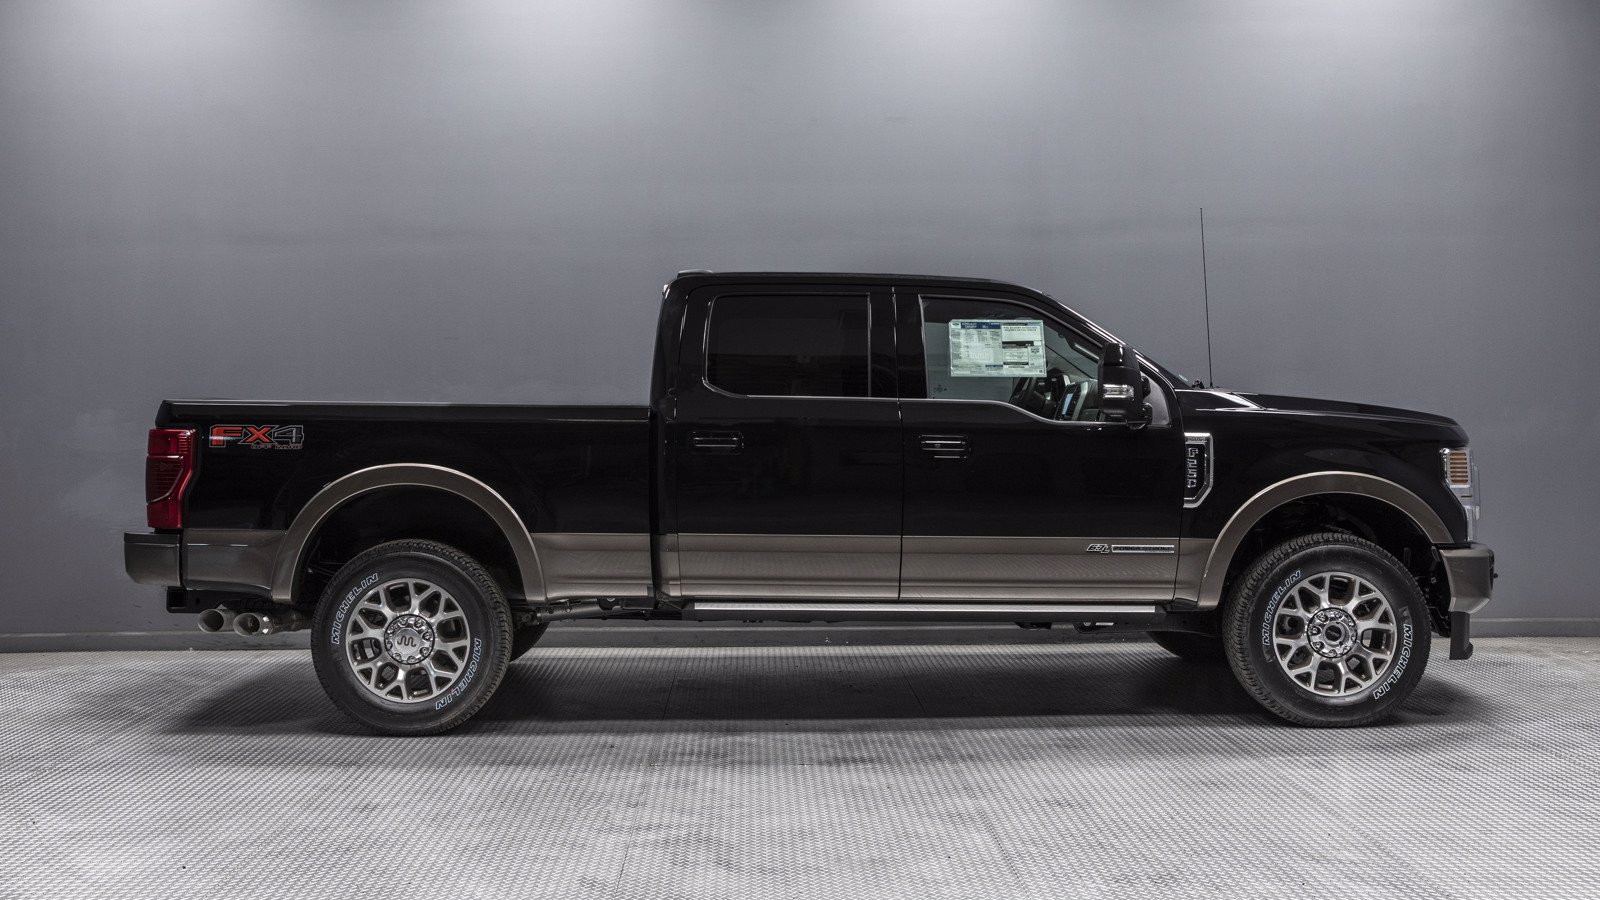 New 2020 Ford Super Duty F 250 Srw King Ranch Crew Cab Pickup In